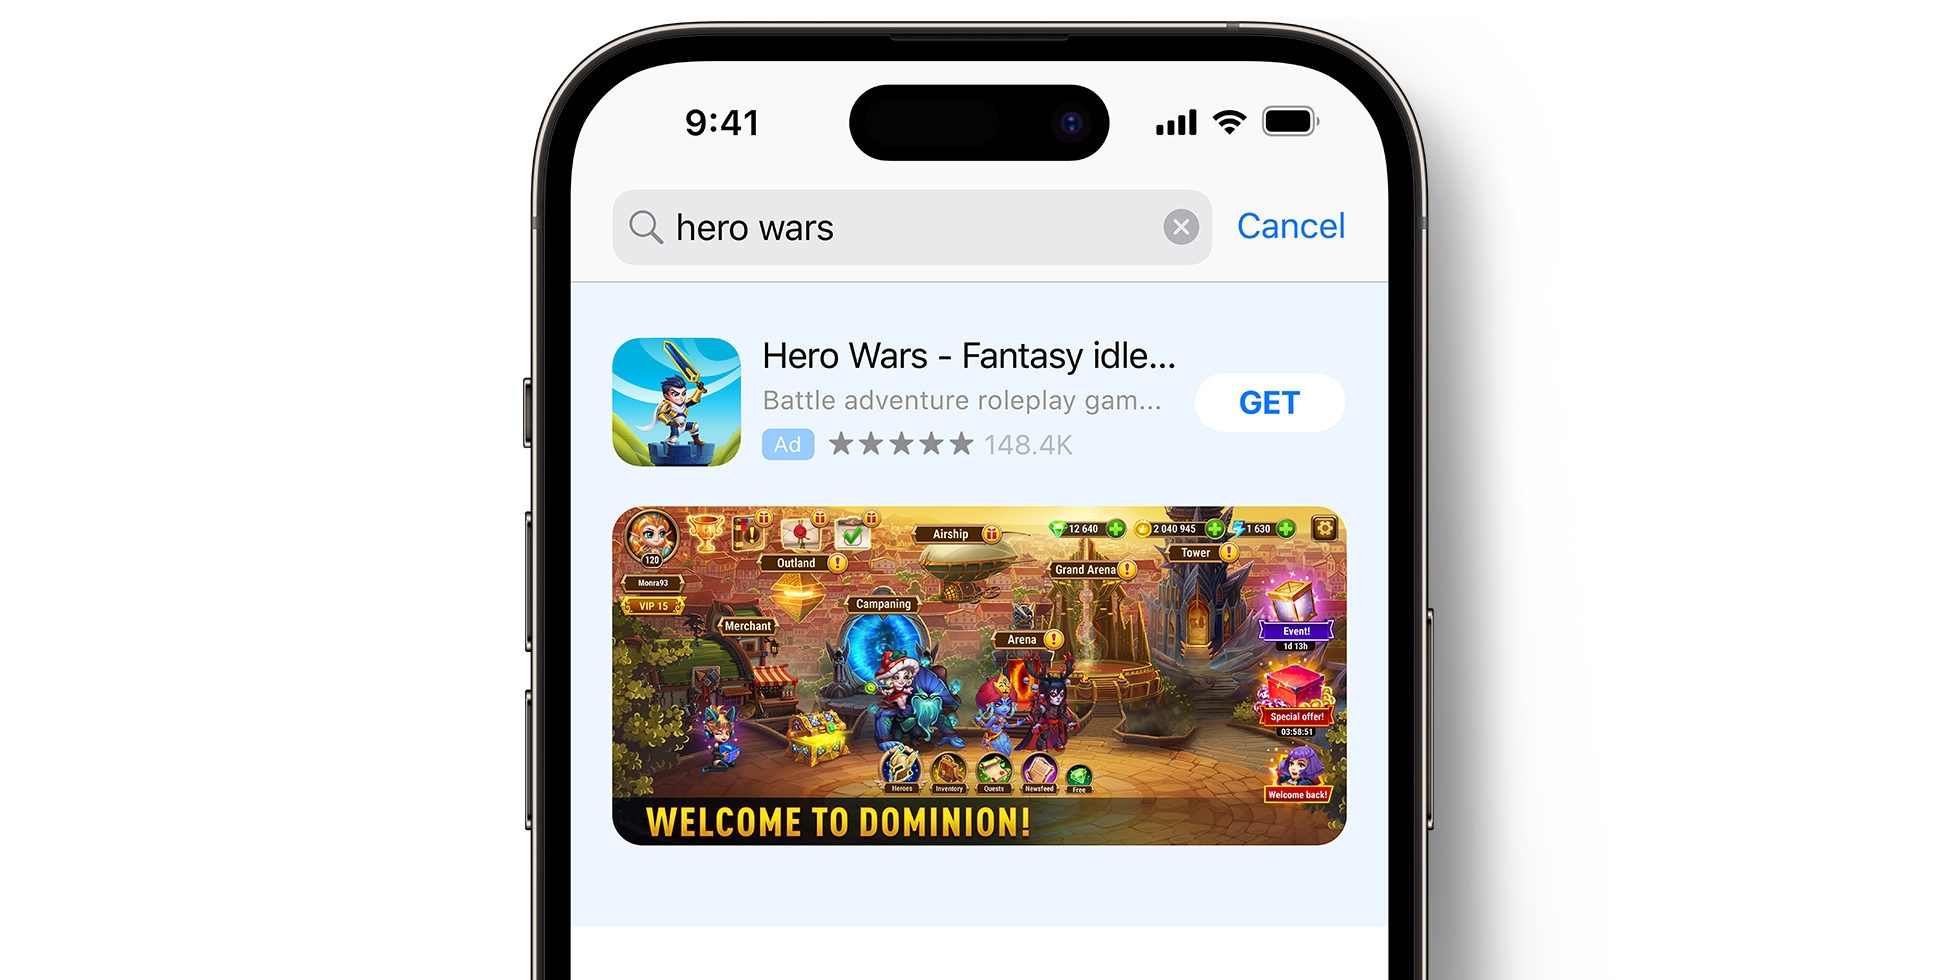 semi-cropped iPhone background with a screen featuring the App Store Ad for Hero Wars